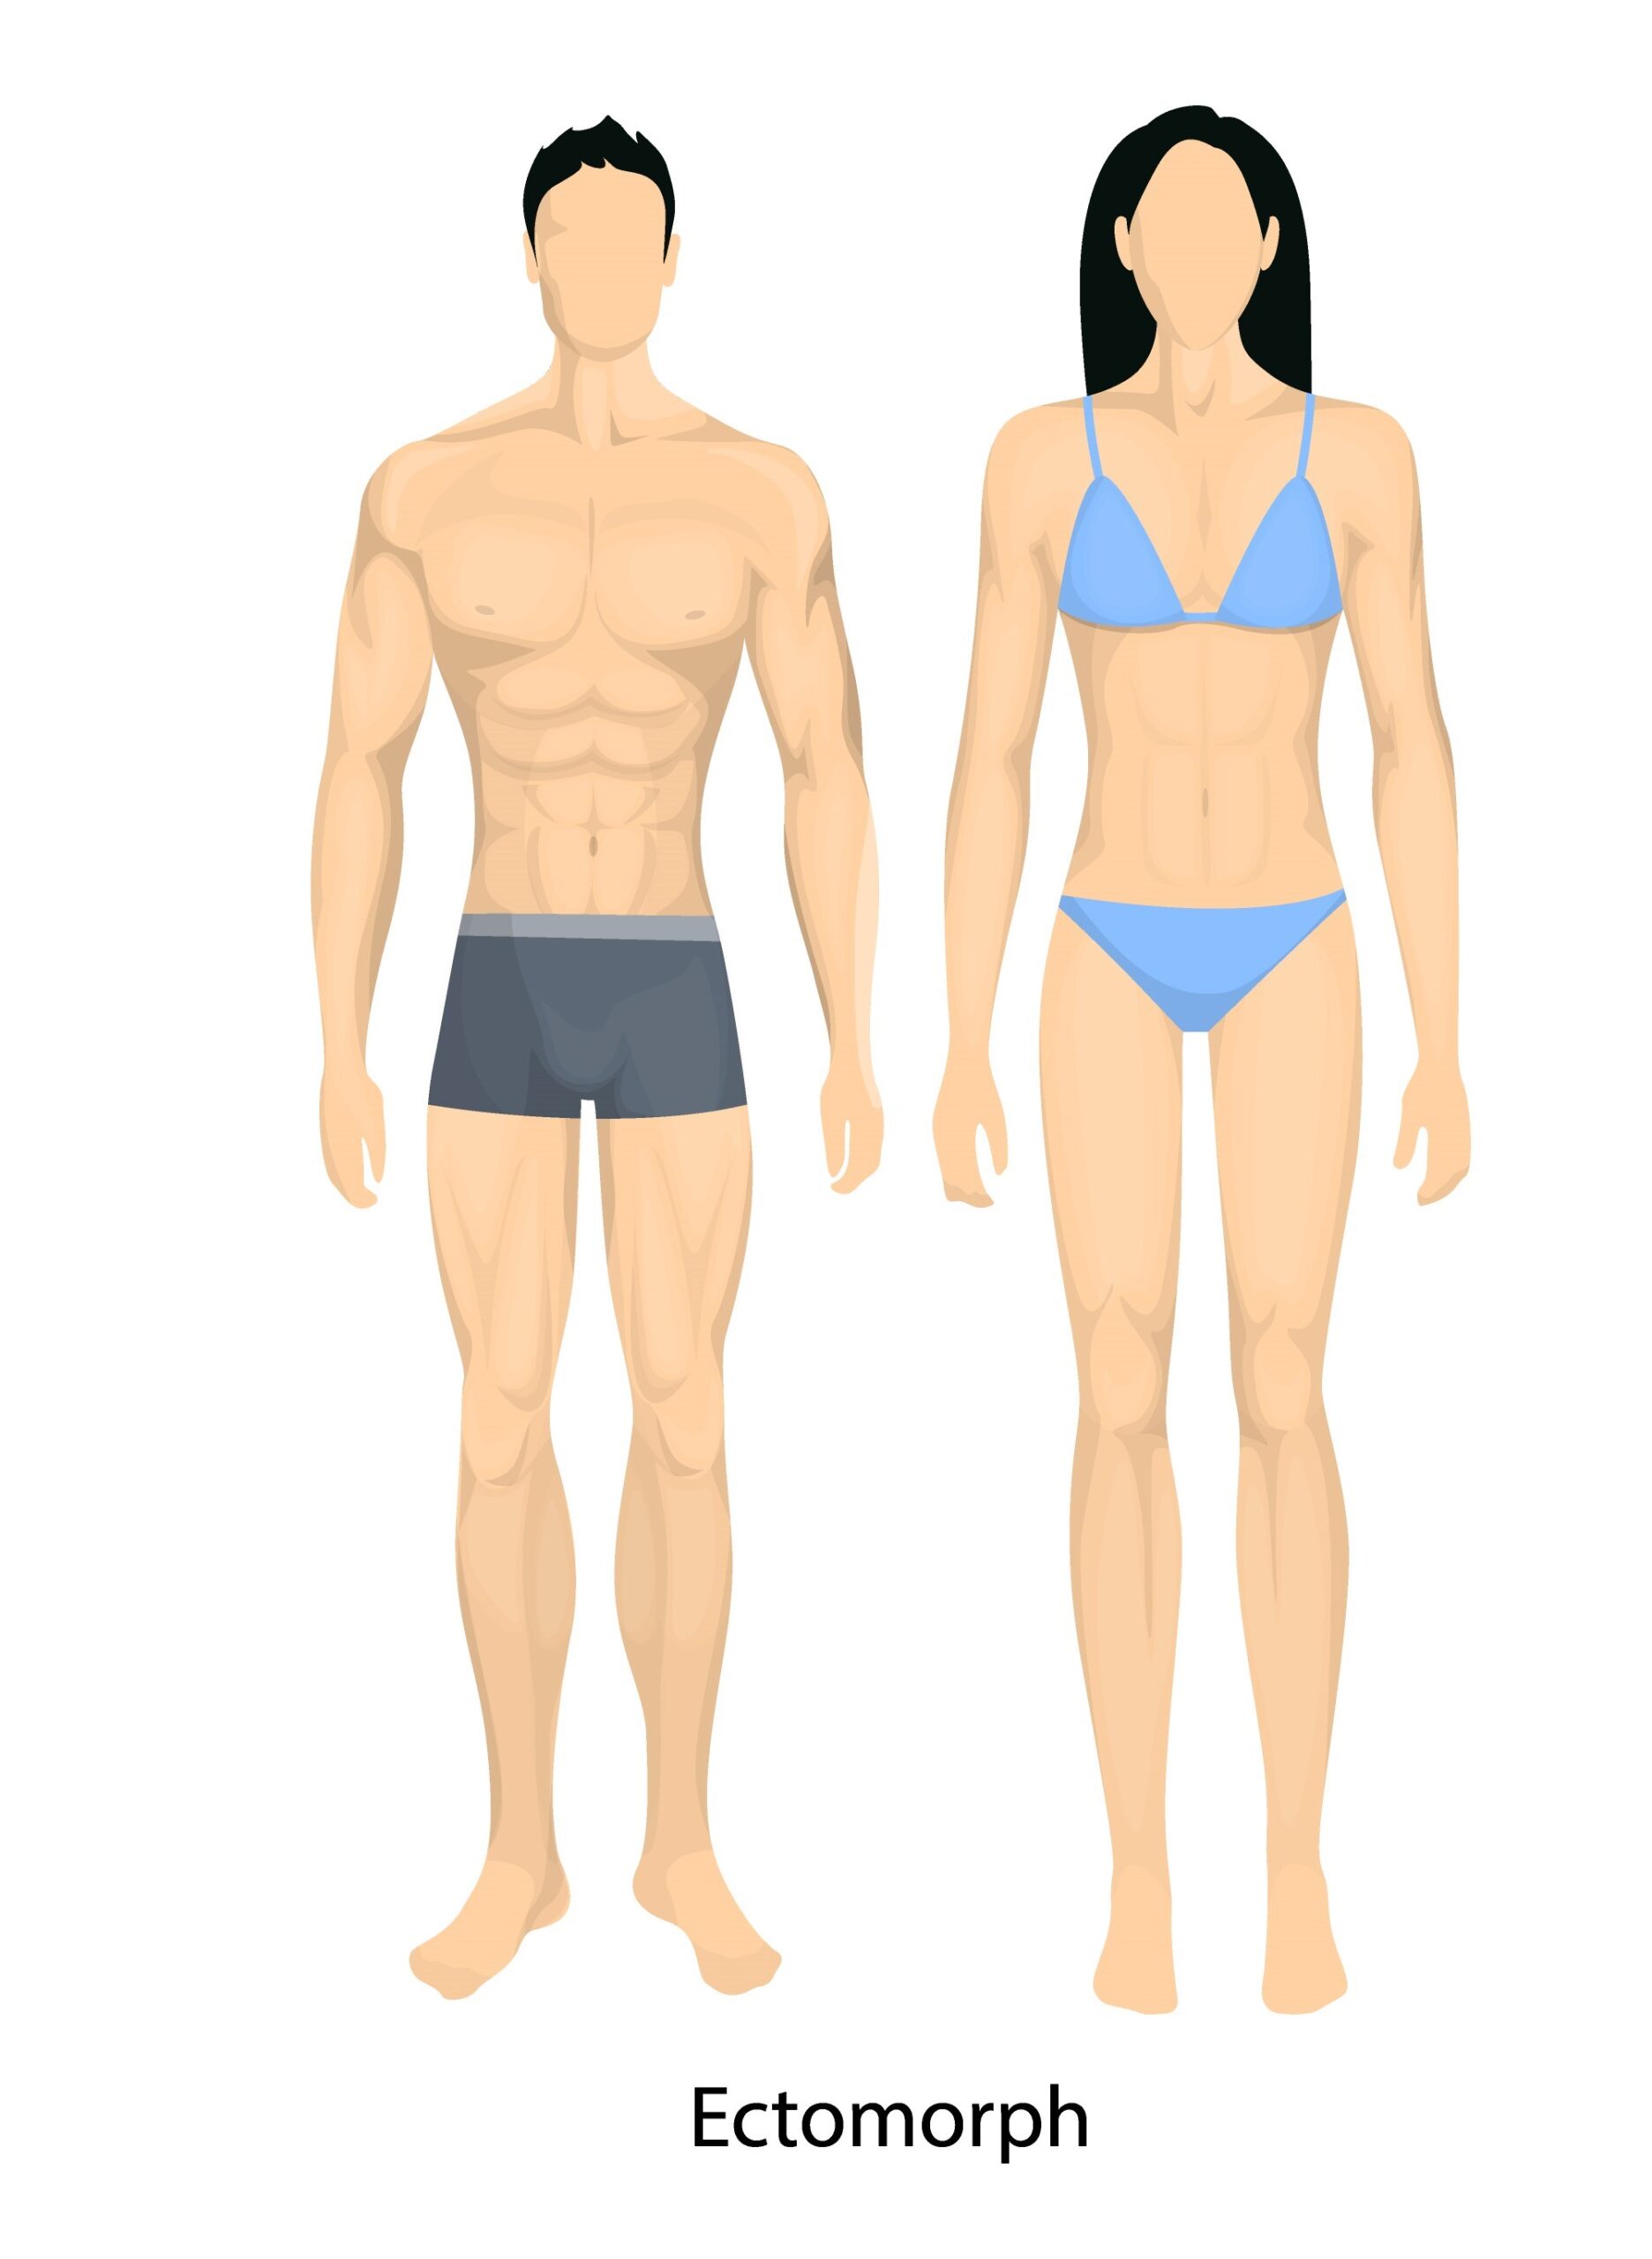 Ectomorph (somatotype thin elongated, difficulty in gaining weight)